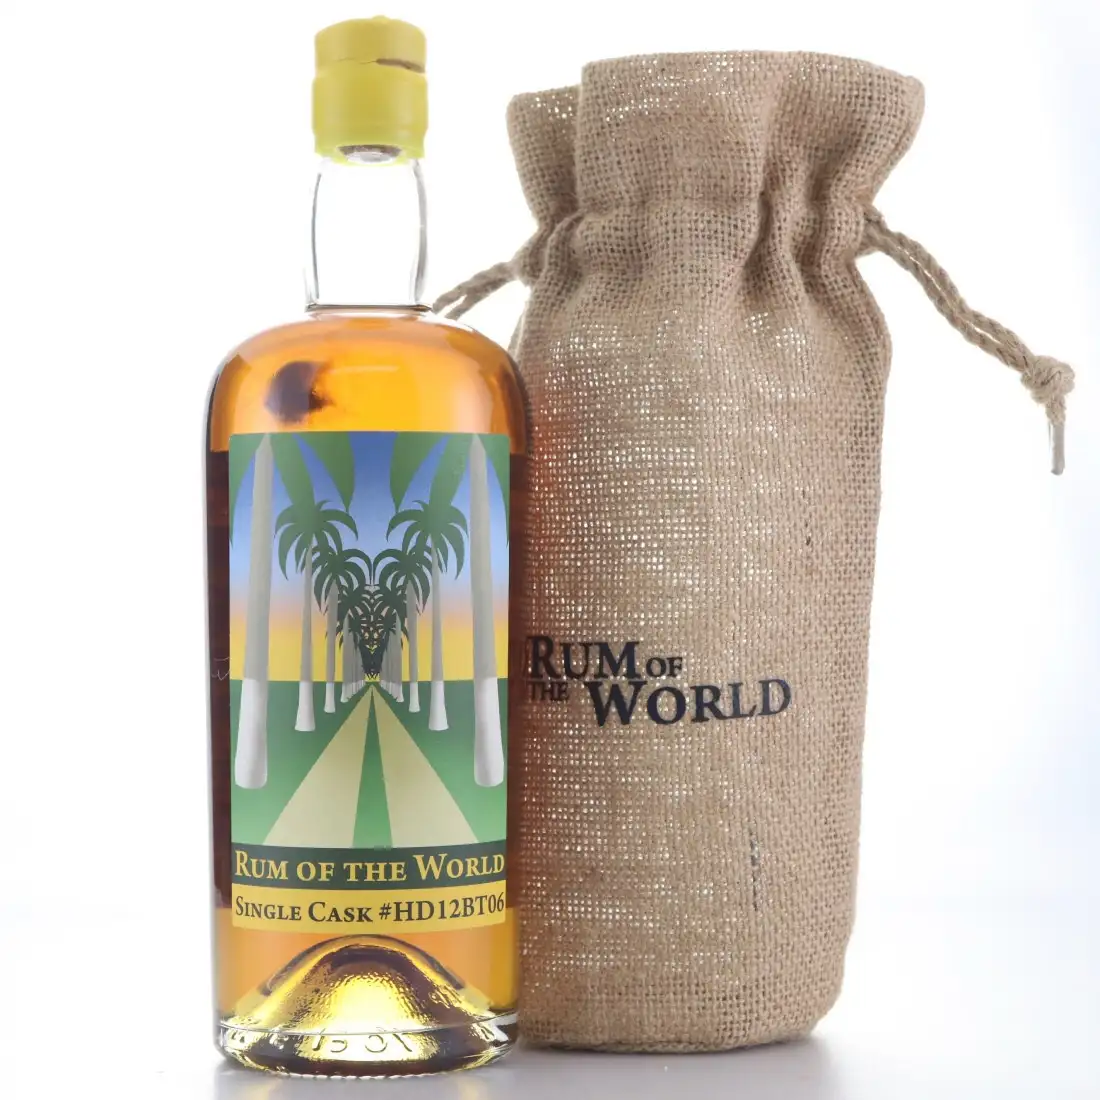 Image of the front of the bottle of the rum Rum of the World OWH